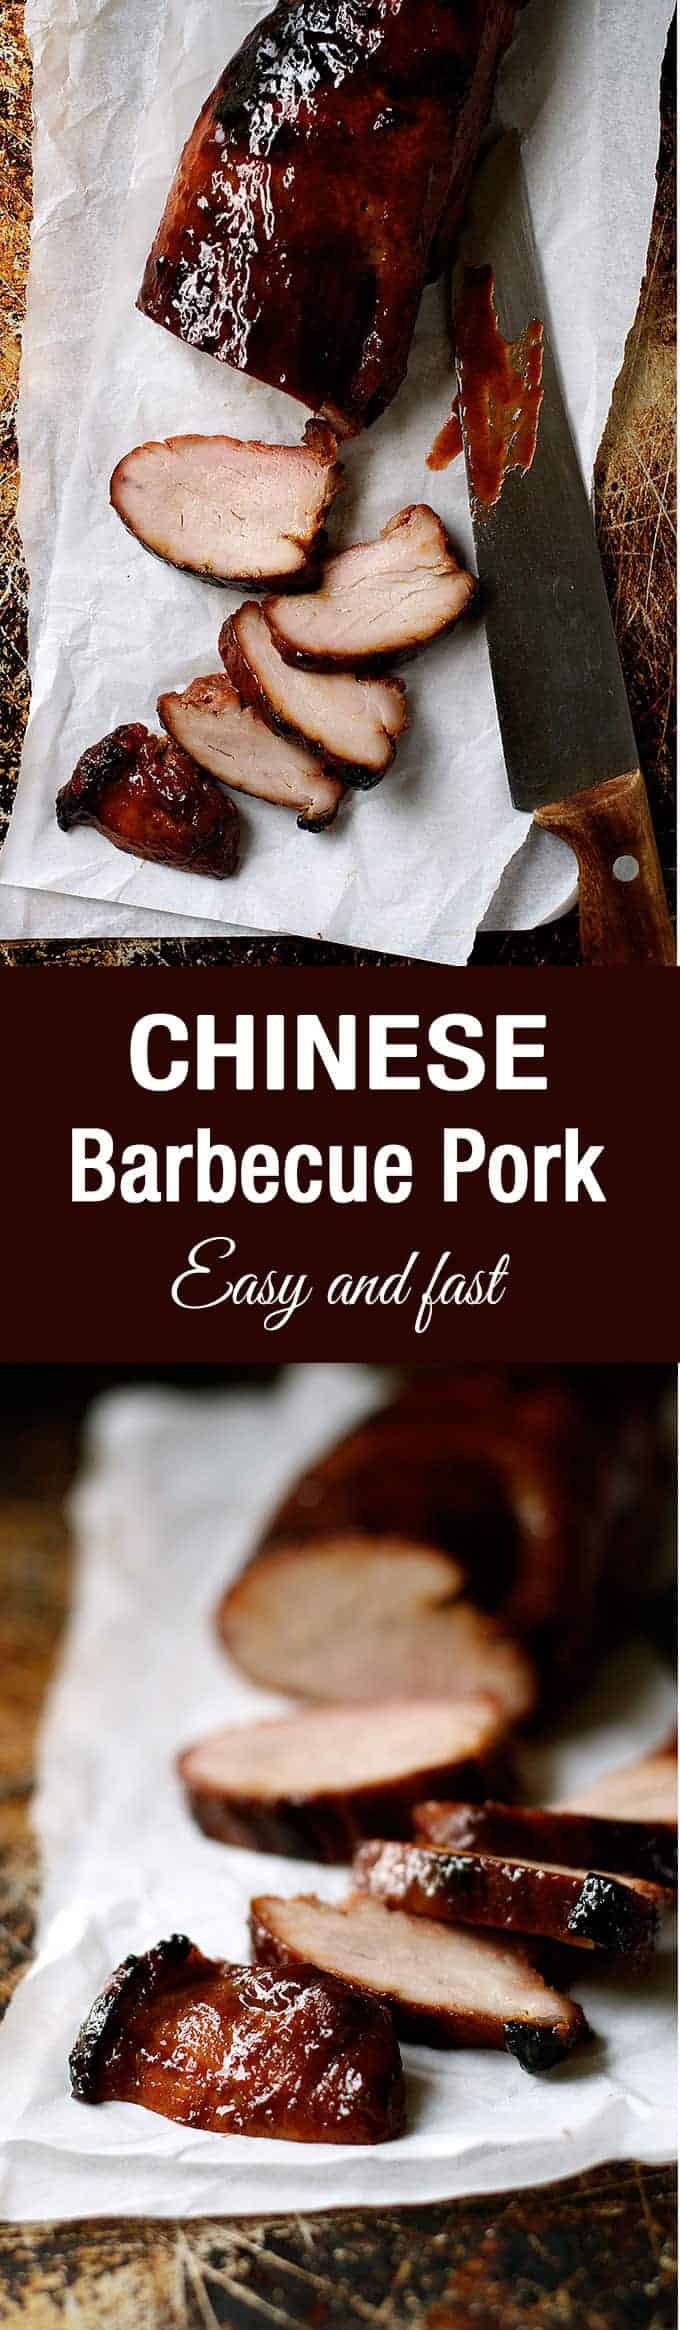 Char Siu (Chinese BBQ Pork) - so easy to make at home in the oven, and you can get all the ingredients at the supermarket!